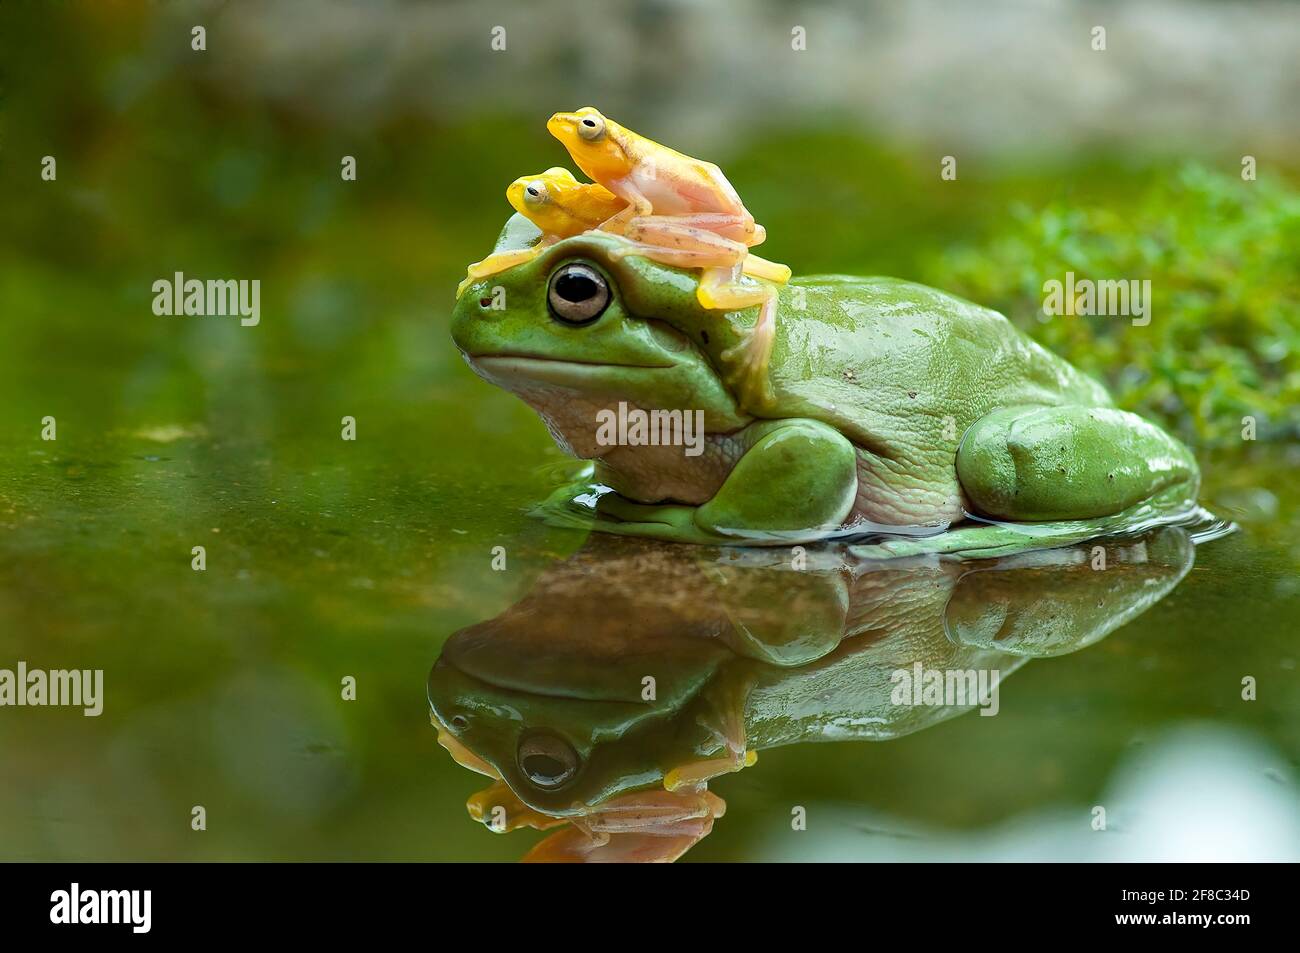 PADANG, INDONESIA: The baby frogs perched on top of the dumpy tree frog. HILARIOUS pictures show that social distancing rules do not apply to frogs as Stock Photo